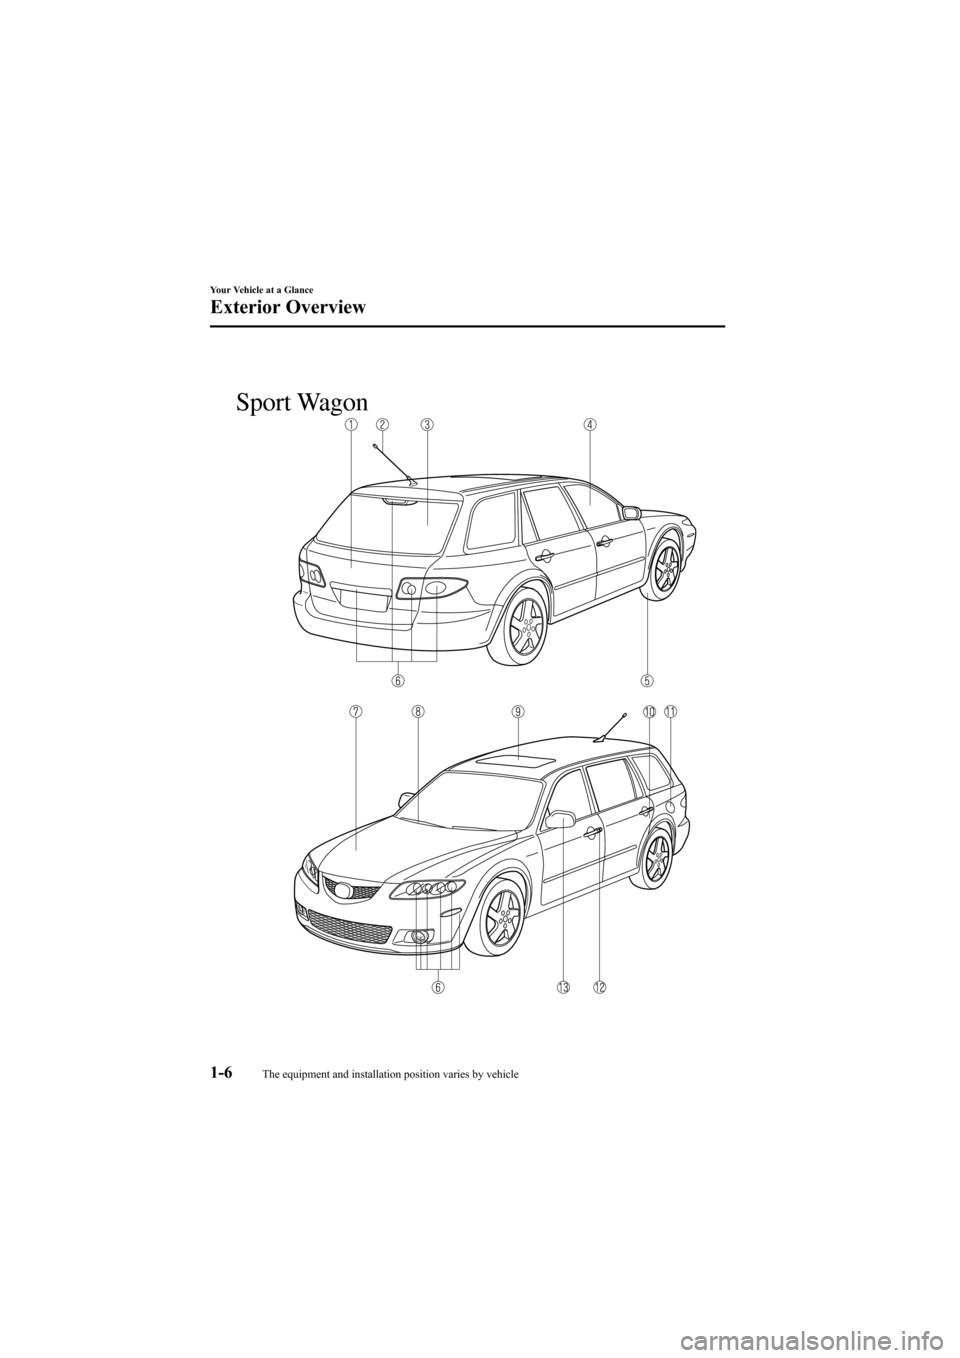 MAZDA MODEL 6 2008   (in English) User Guide Black plate (12,1)
Sport Wagon
1-6
Your Vehicle at a Glance
The equipment and installation position varies by vehicle
Exterior Overview
Mazda6_8X47-EA-07G_Edition1 Page12
Tuesday, May 29 2007 3:42 PM
